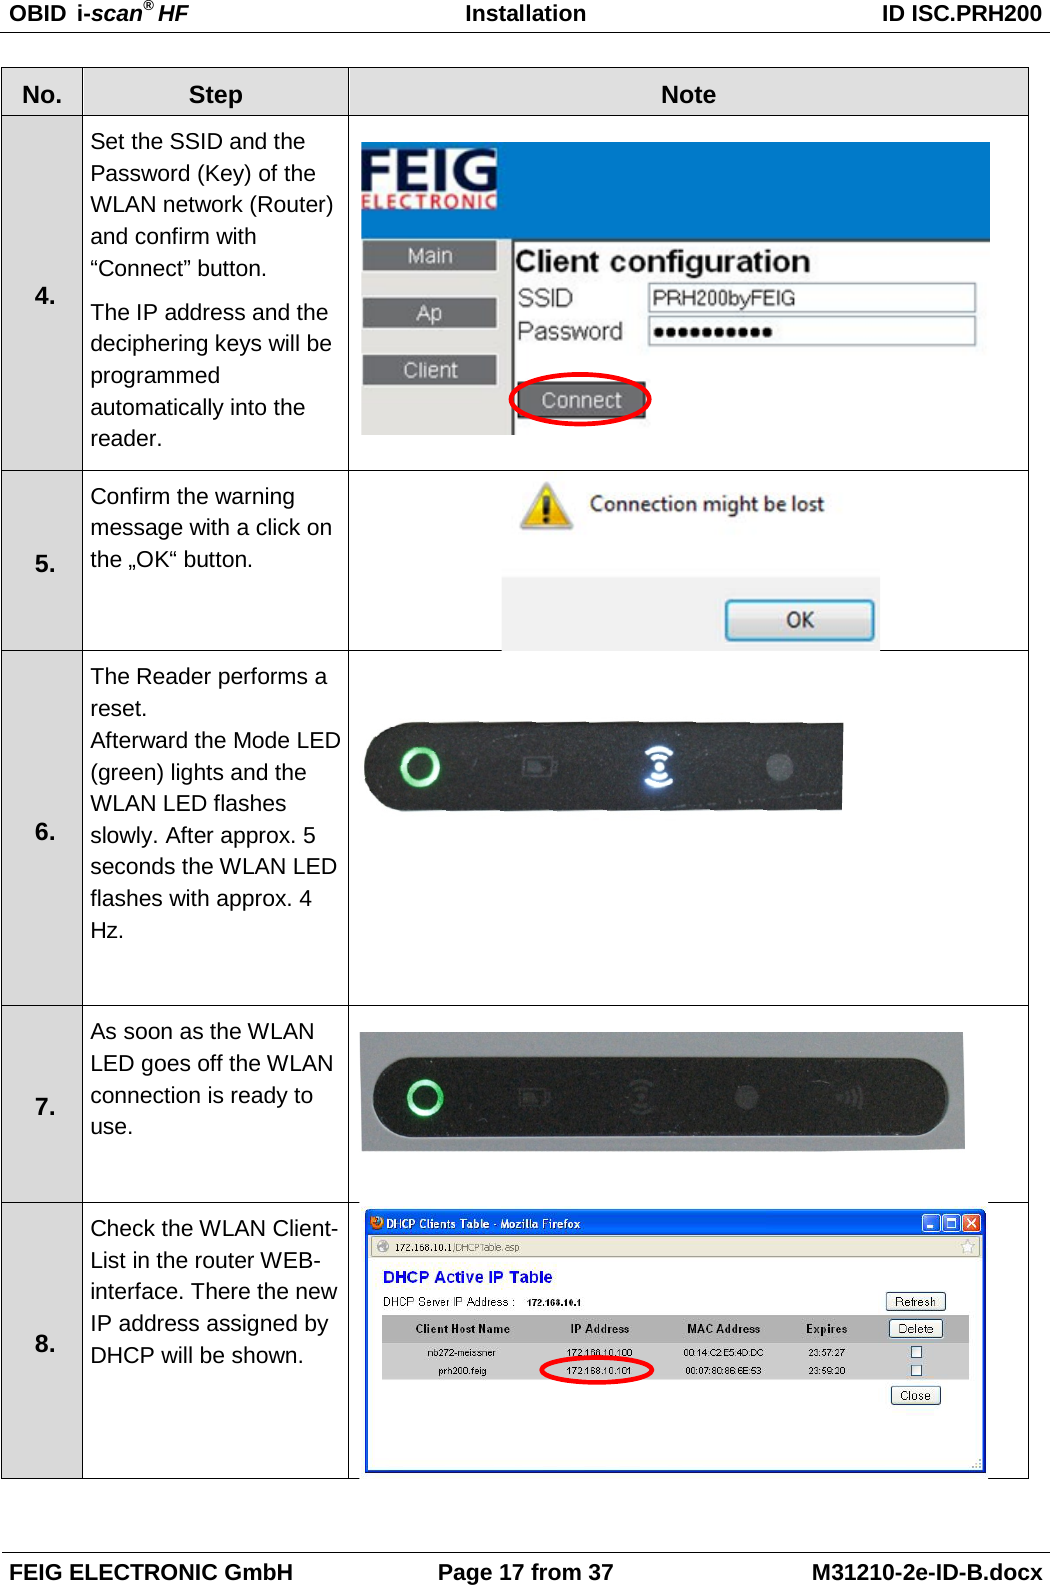 OBID  i-scan® HF Installation ID ISC.PRH200  FEIG ELECTRONIC GmbH Page 17 from 37 M31210-2e-ID-B.docx  No.  Step Note 4.  Set the SSID and the Password (Key) of the WLAN network (Router) and confirm with “Connect” button. The IP address and the deciphering keys will be programmed automatically into the reader.    5.  Confirm the warning message with a click on the „OK“ button.   6.  The Reader performs a reset.  Afterward the Mode LED (green) lights and the WLAN LED flashes slowly. After approx. 5 seconds the WLAN LED flashes with approx. 4 Hz.     7.  As soon as the WLAN LED goes off the WLAN connection is ready to use.    8.  Check the WLAN Client-List in the router WEB-interface. There the new IP address assigned by DHCP will be shown.    